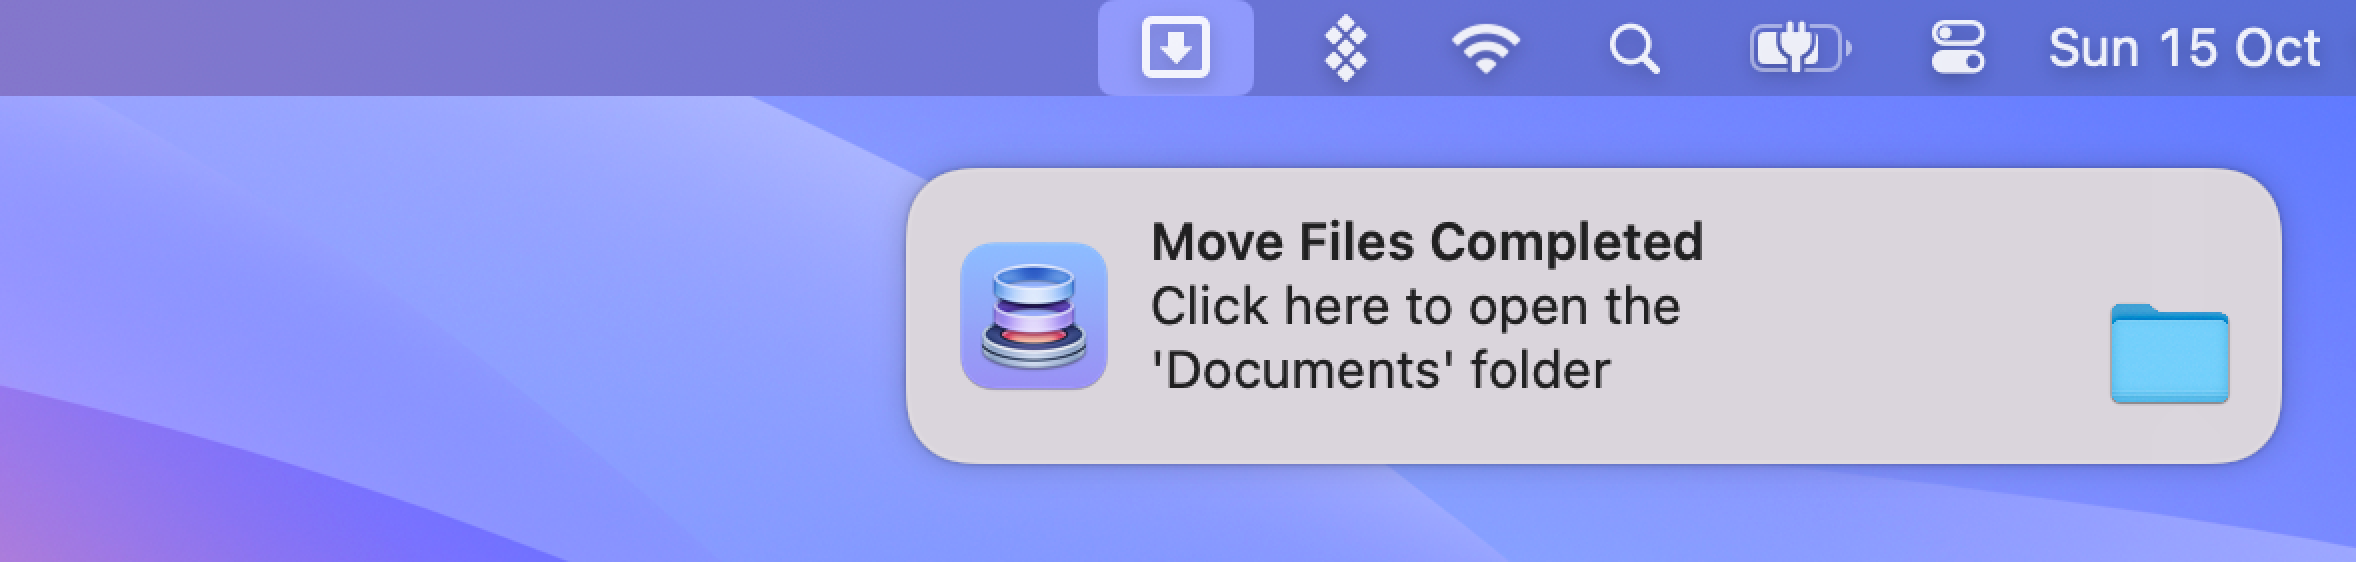 The action is performed on your file